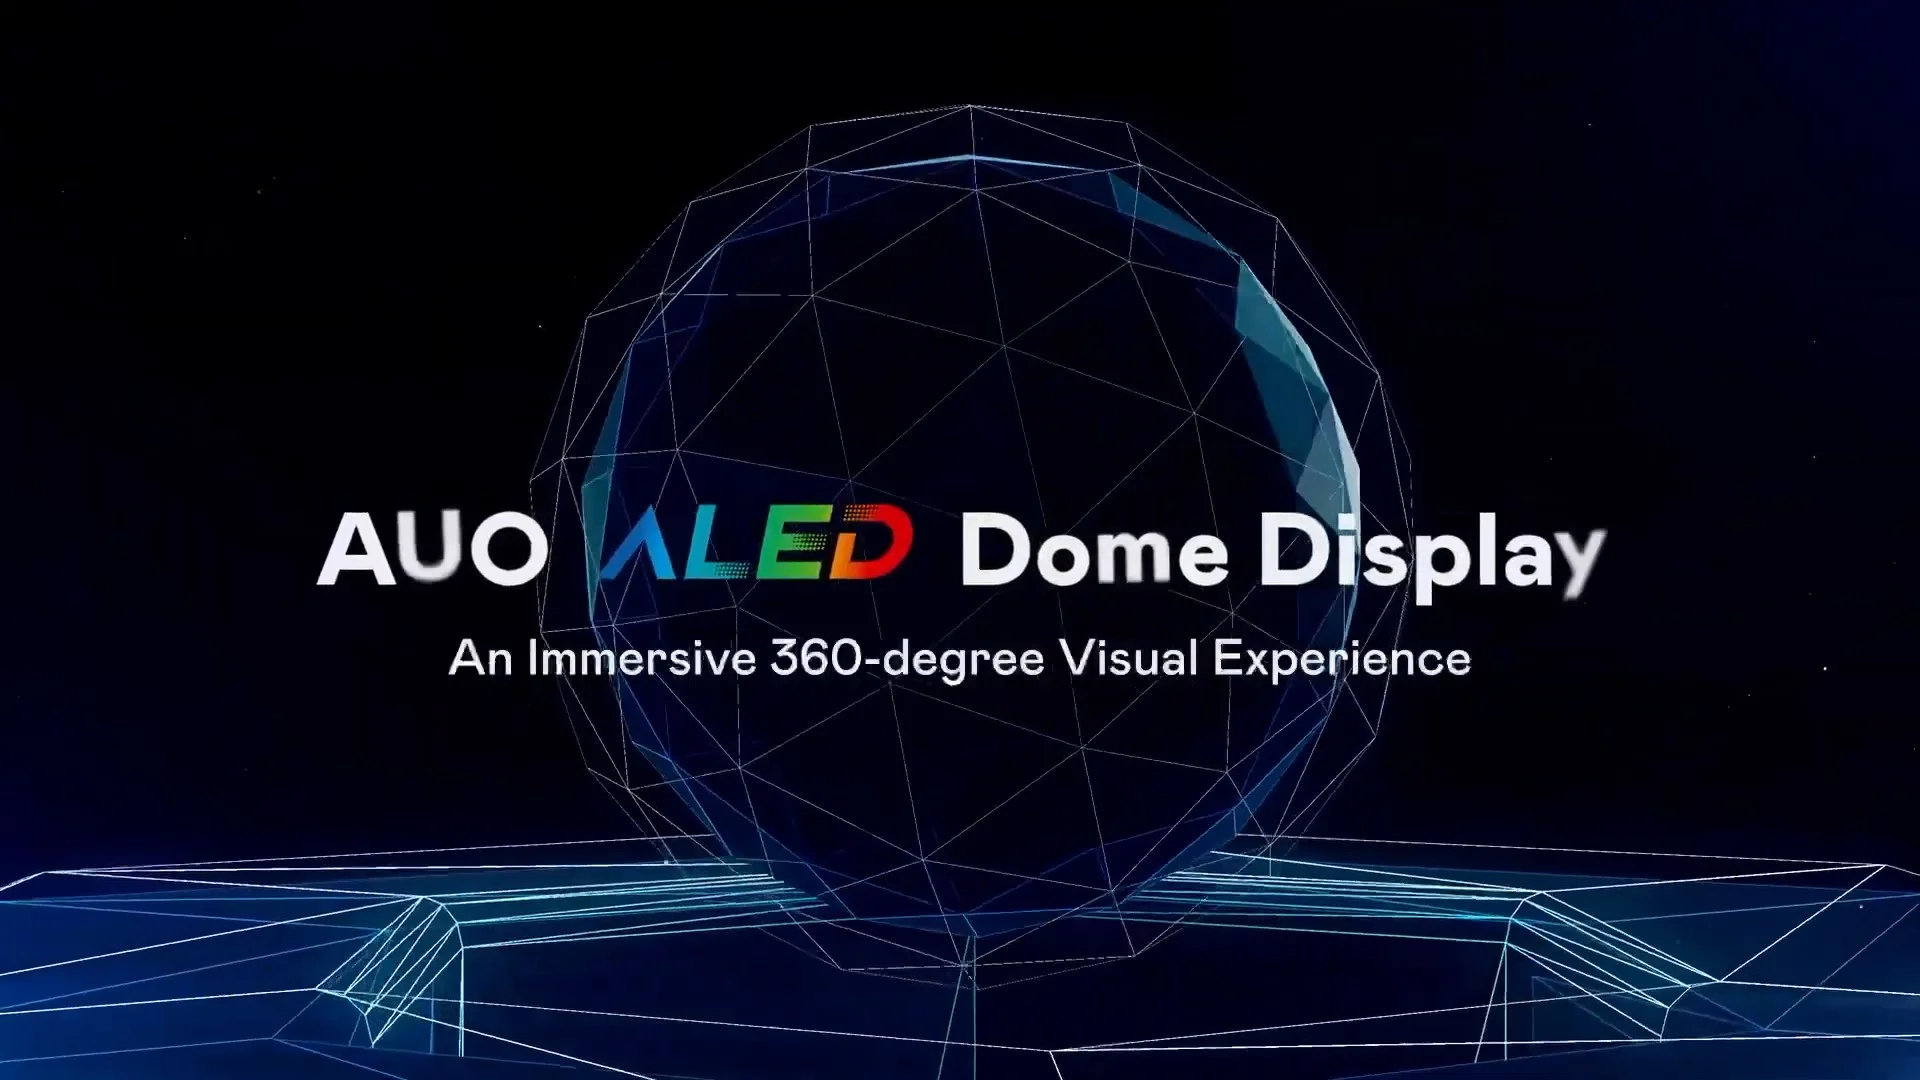 AUO LED Dome Display – Creating Immersive Visual Experience